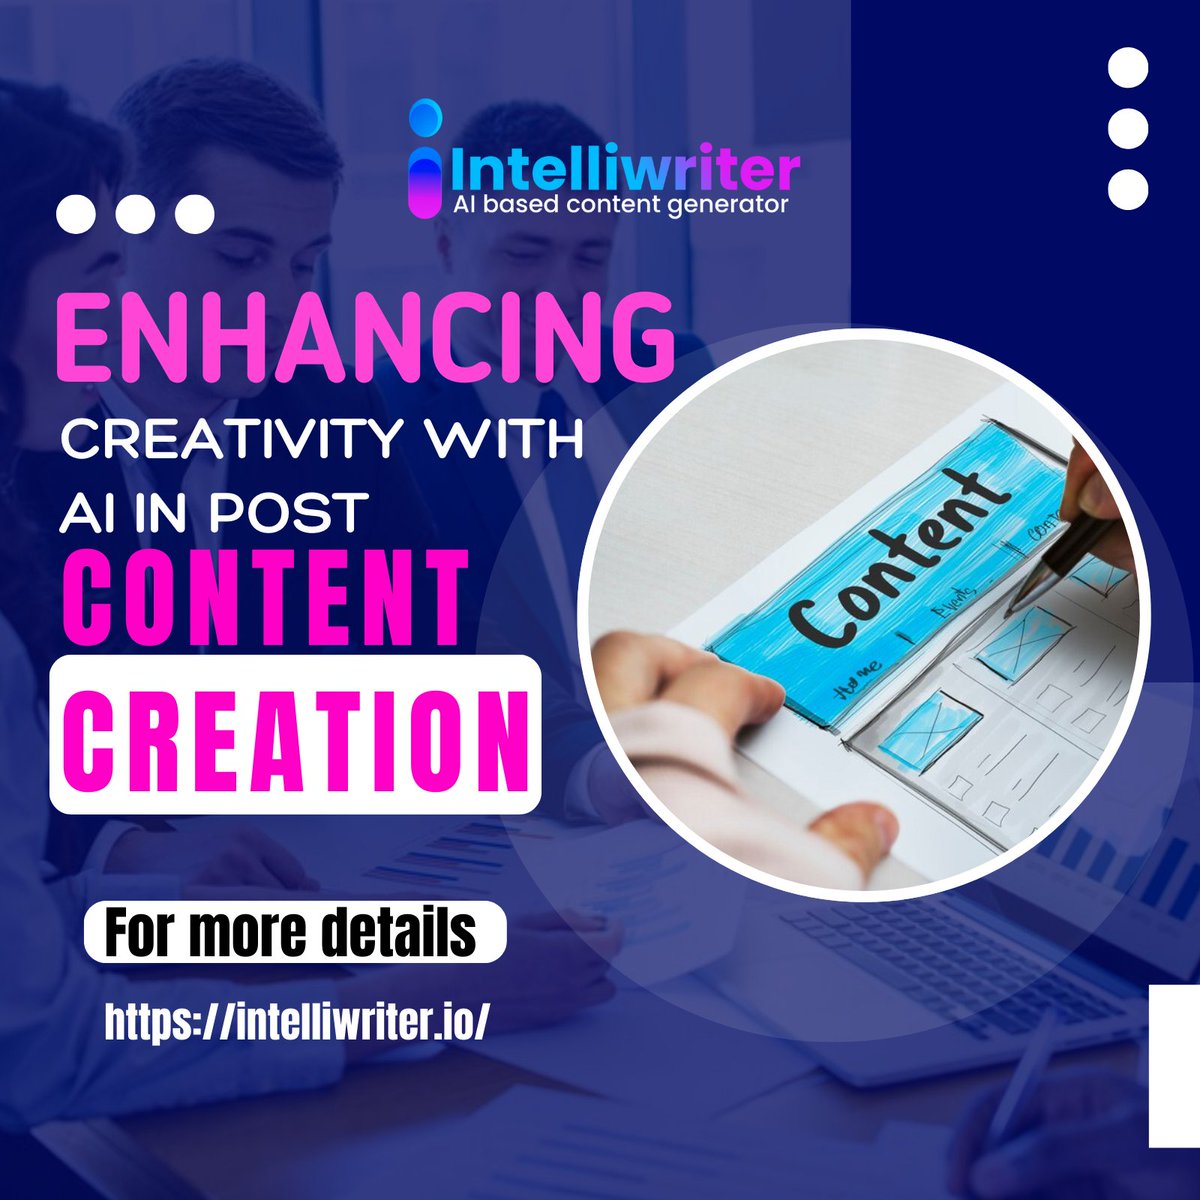 **Enhancing Creativity with AI in Post-Content Creation** 

Unlock the potential of AI and elevate your post content creation with Intelliwriter. Transform your ideas into captivating content effortlessly! 

intelliwriter.io
#Intelliwriter #Aibasedcontentgenerator #AIImage